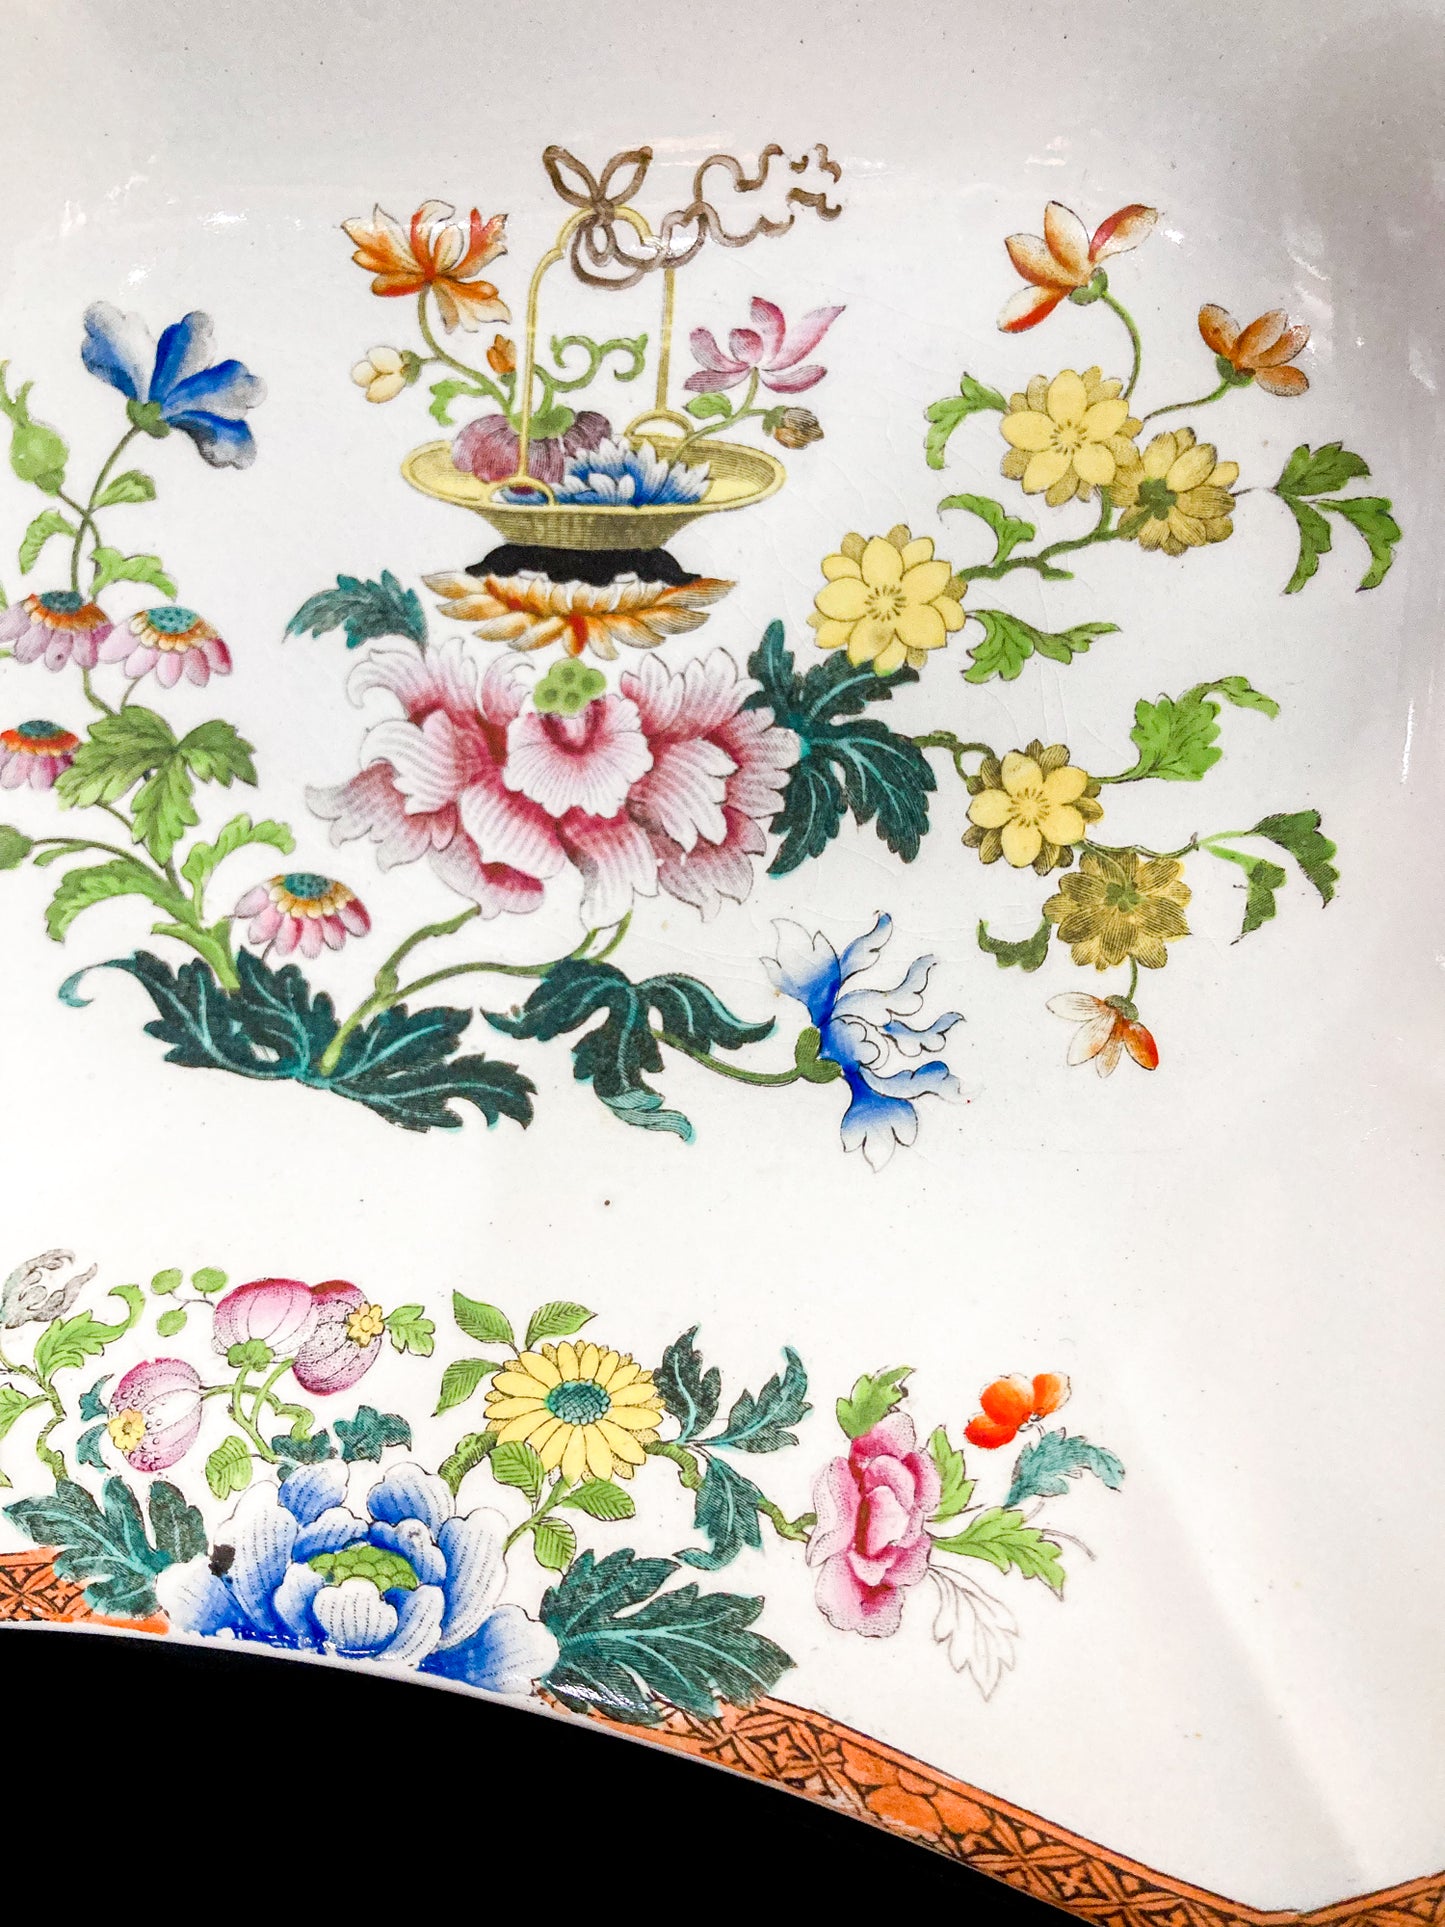 Antique 1850s Wedgwood Enameled Multicolor Floral Footed Compote Dish Close Up Design on Top